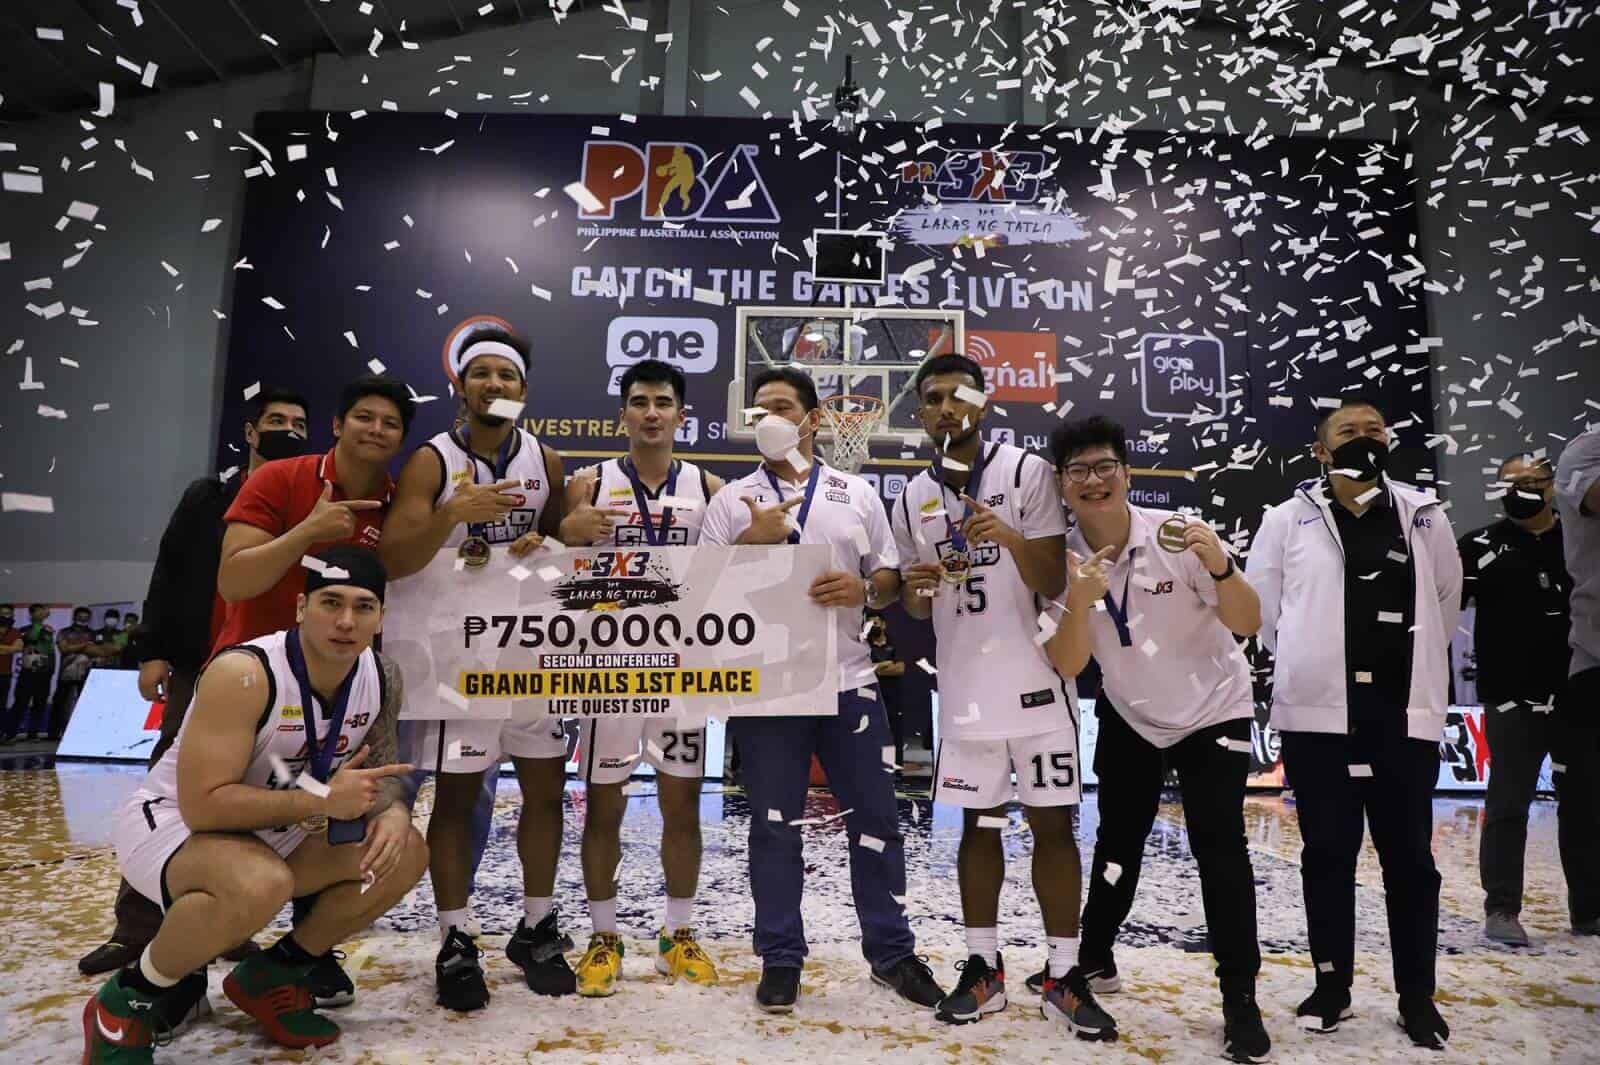 A group of basketball players joyfully posing with confetti after Pioneer Pro Tibay's championship win in the PBA 3x3 Second Conference Grand Finals.